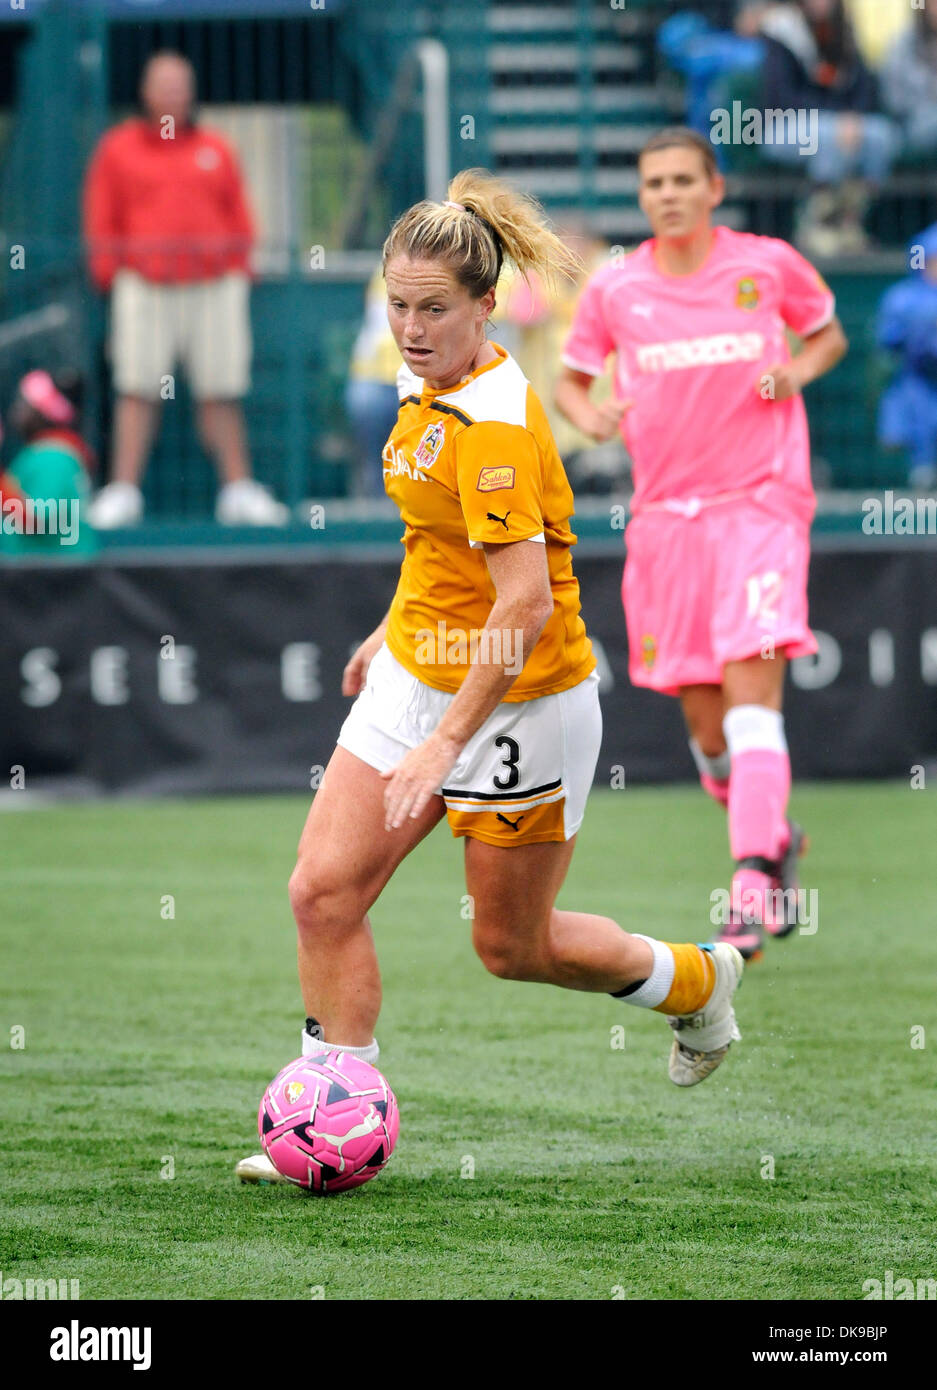 August 14, 2011: Western New York Flash defeated the Atlanta Beat 2-0 at Sahlen's in Rochester, NY a Women's Professional (WPS) matchup. Atlanta Beat's Kylie Wright (3) takes the